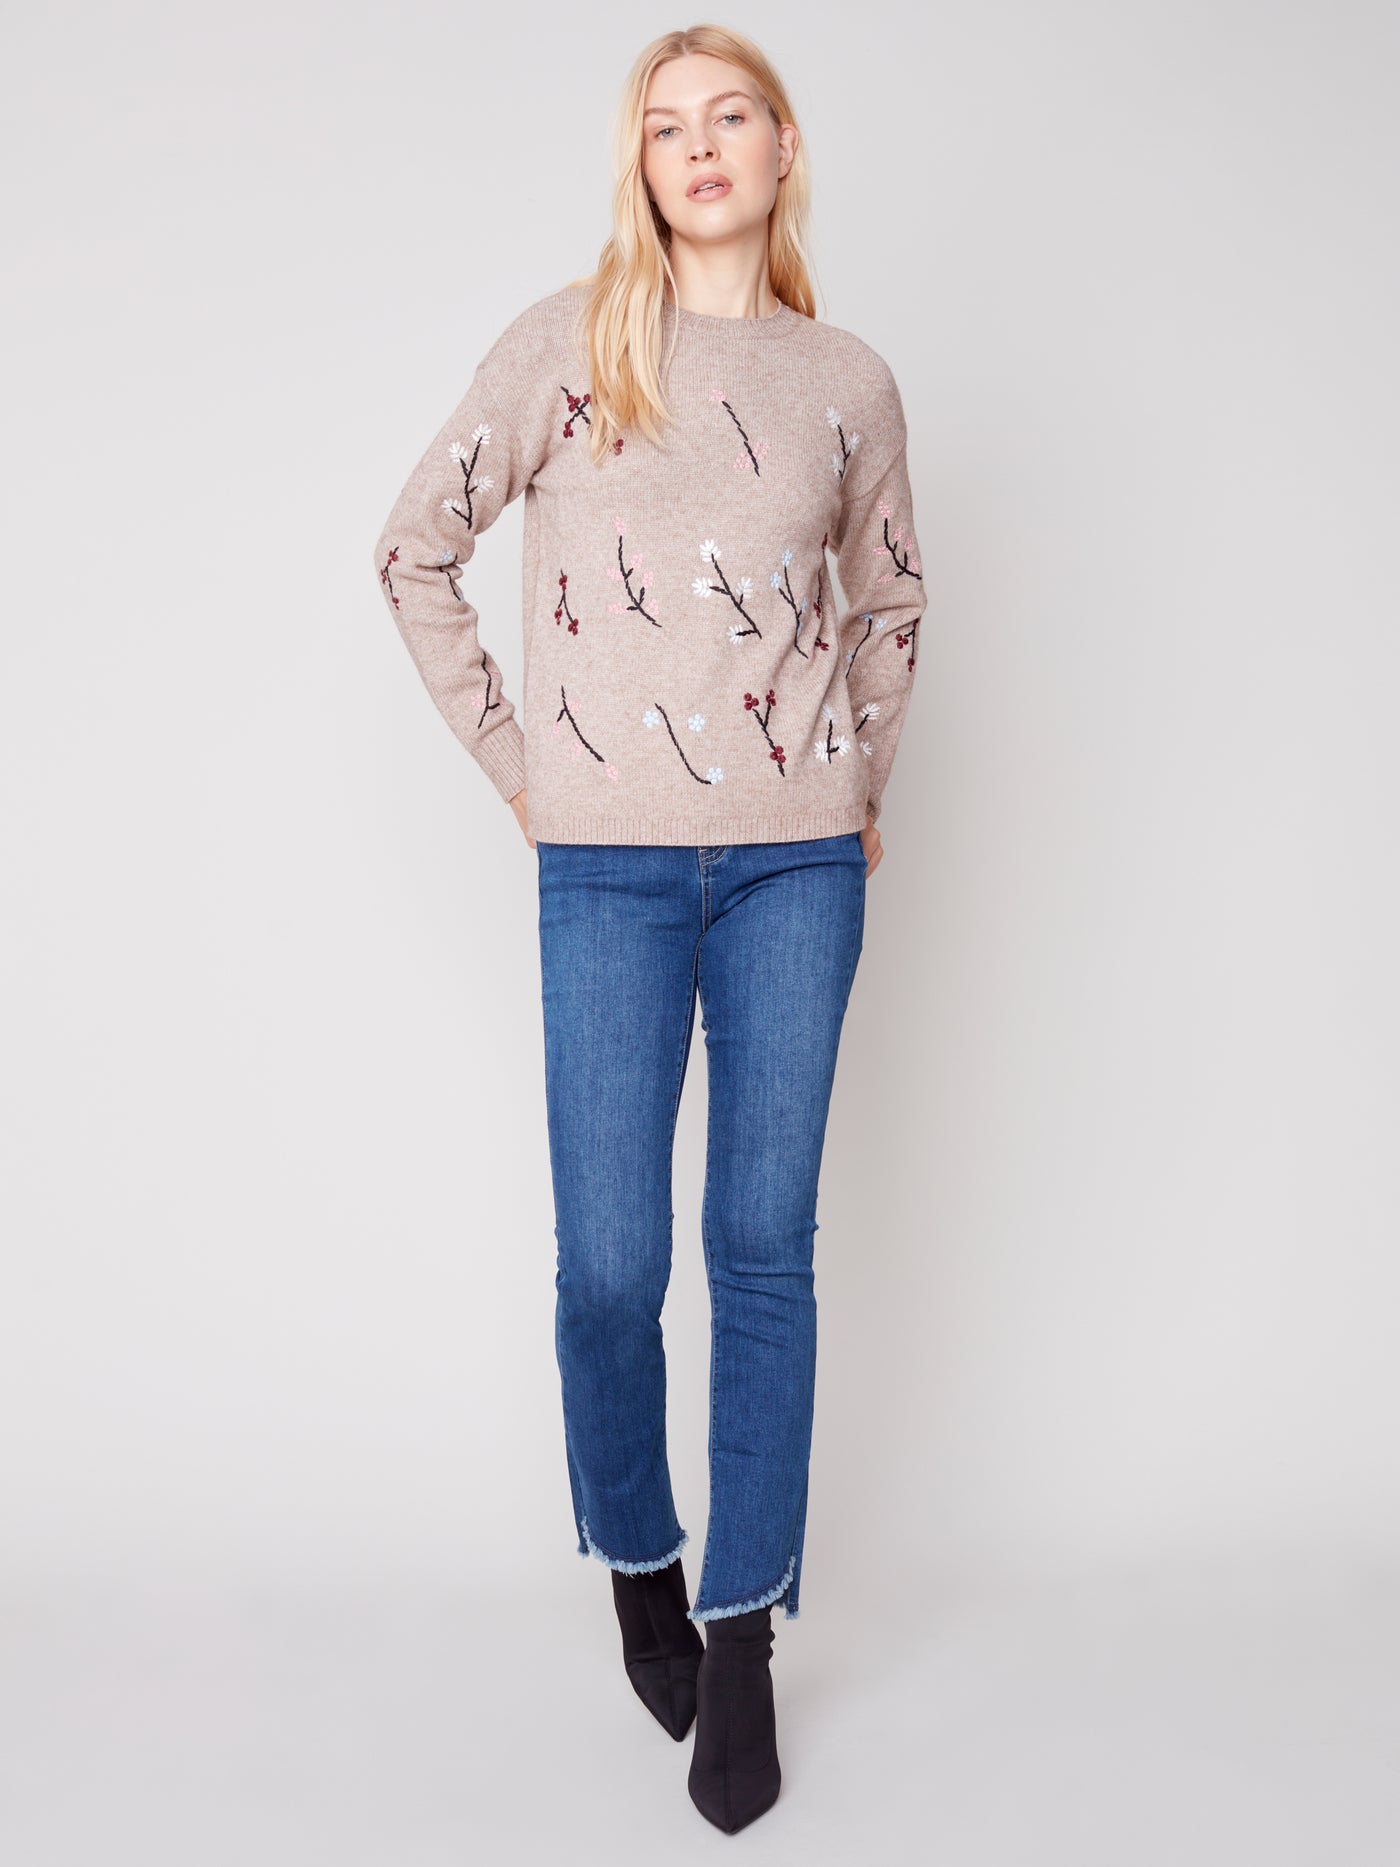 Charlie B Crewneck Drop Shoulder Sweater with Flower Embroideries 